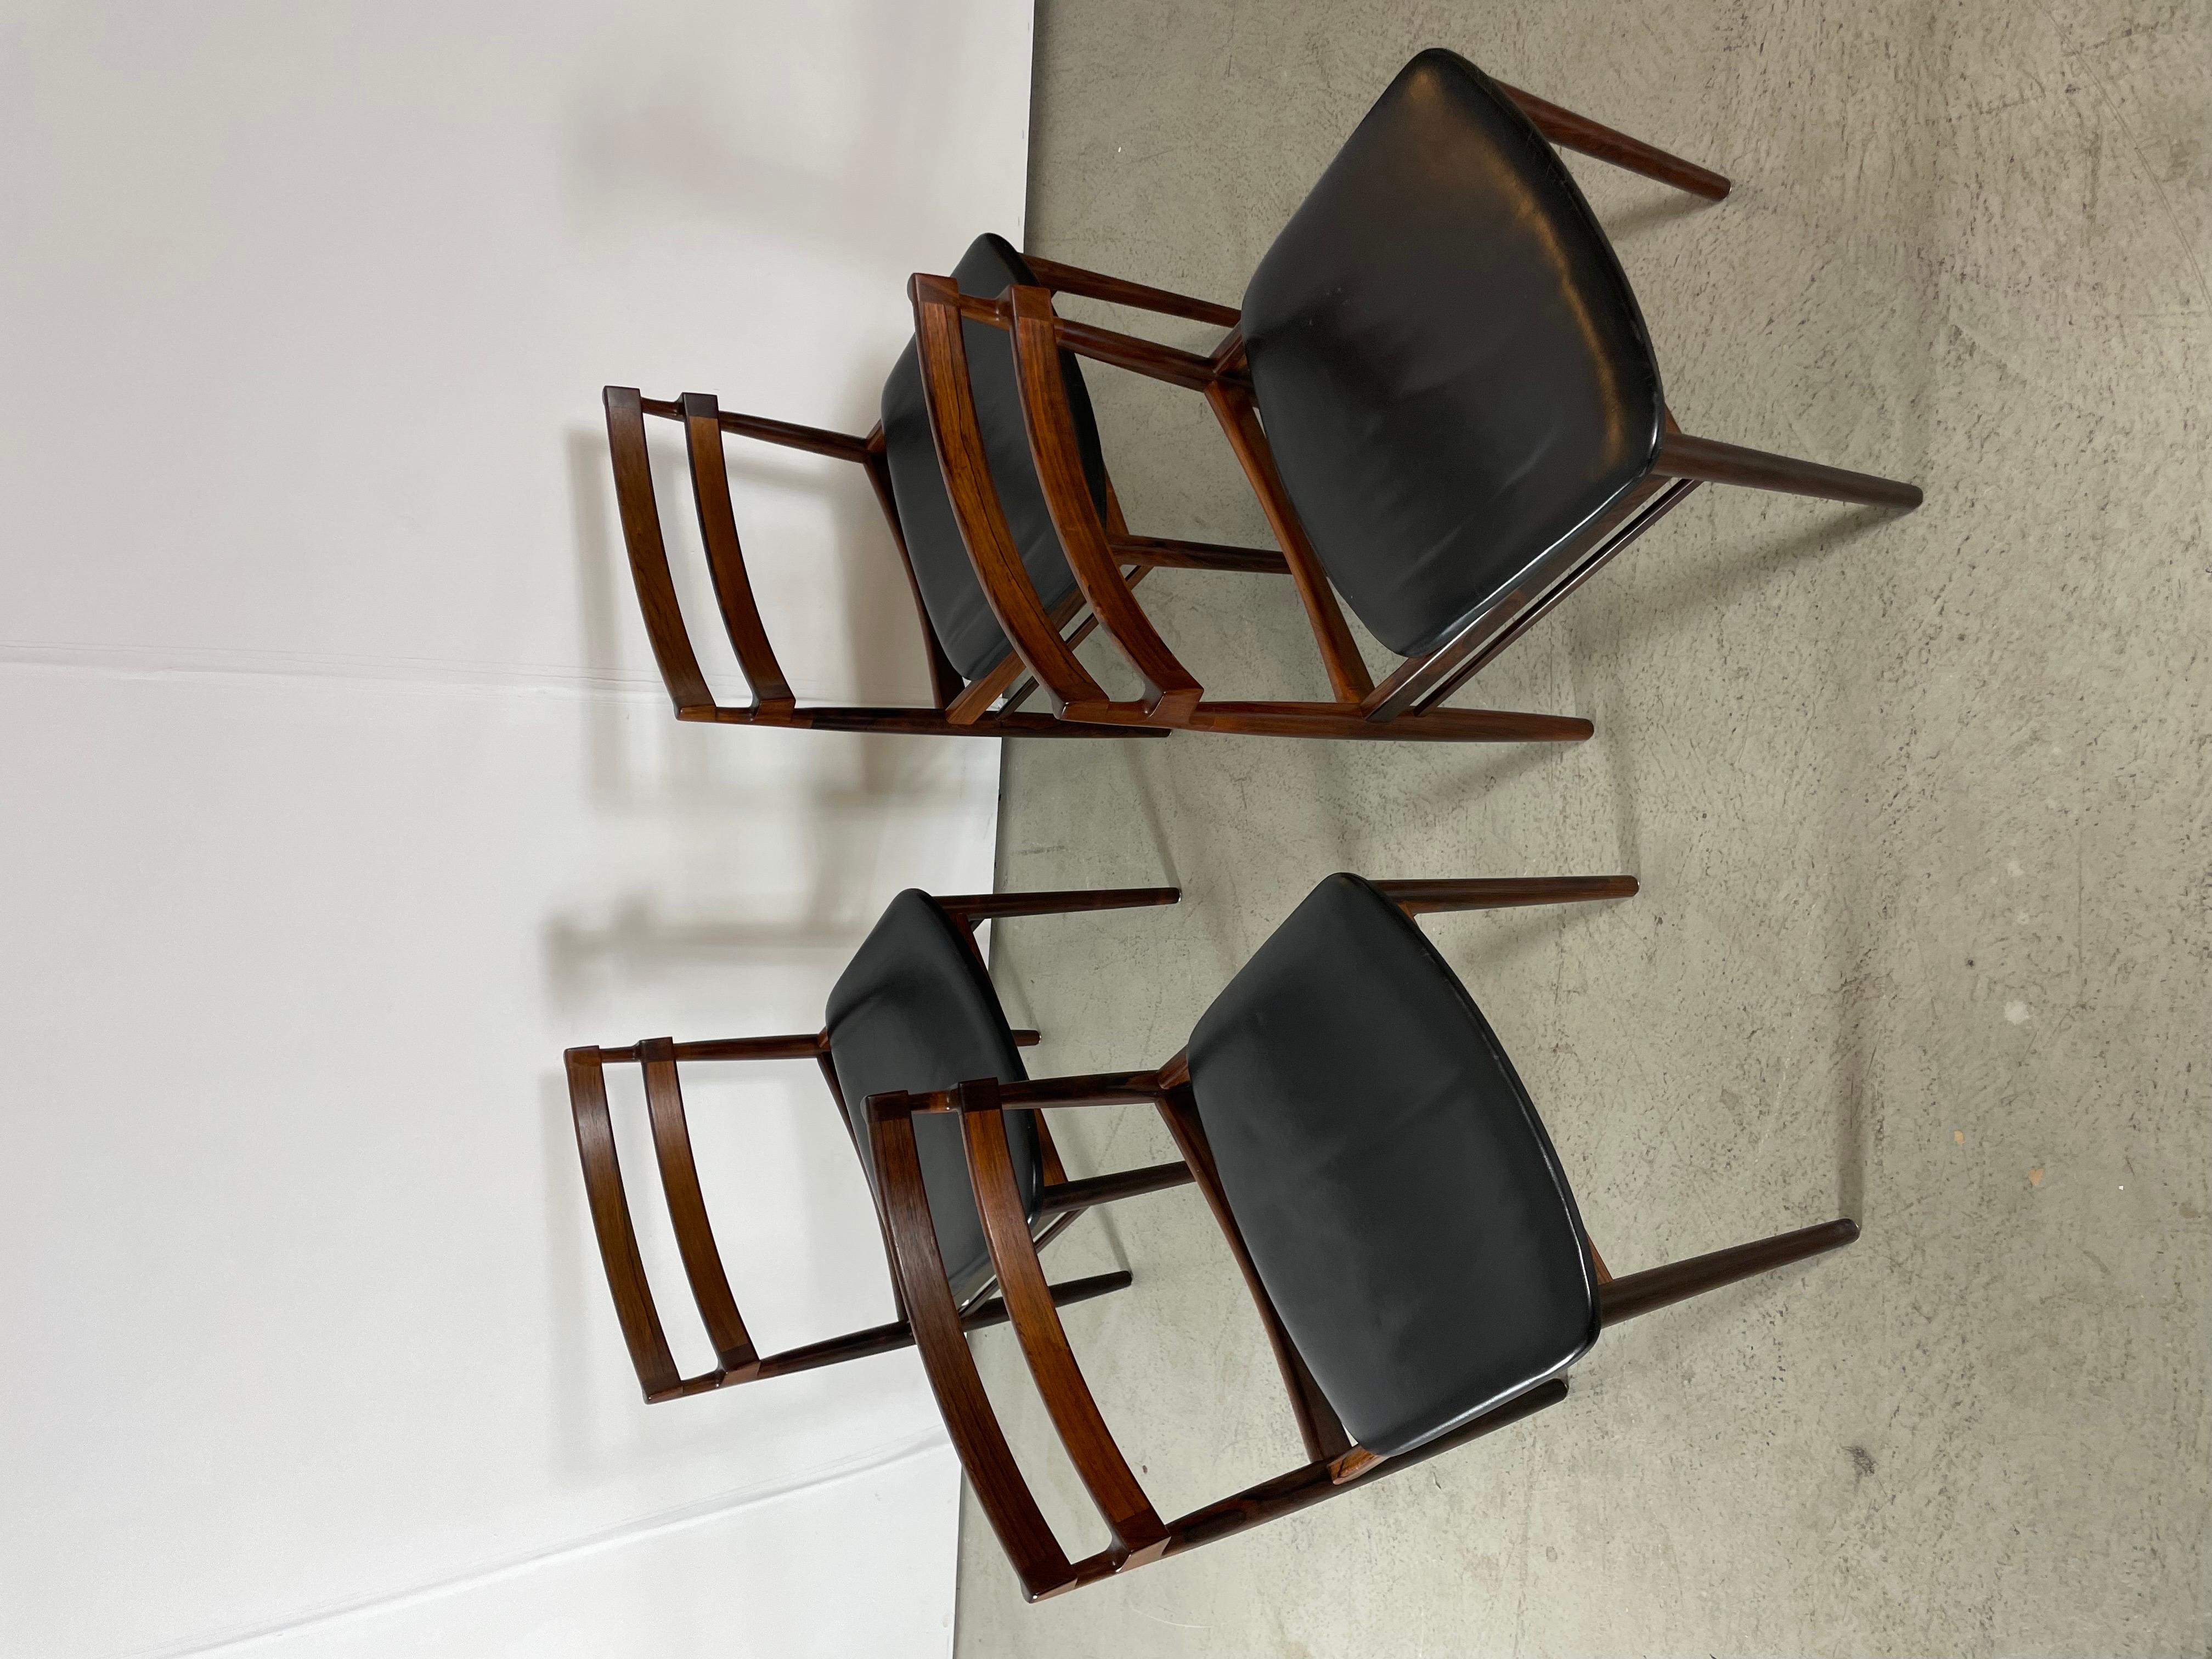 An absolutely rare and stunning set of 4x dining chairs in rio palisander, designed by Henry Rosengren. Made in Denmark by Brande Møbelindustri during the 1950s. They feature a solid wooden frame in rio palisander and the original upholstery in